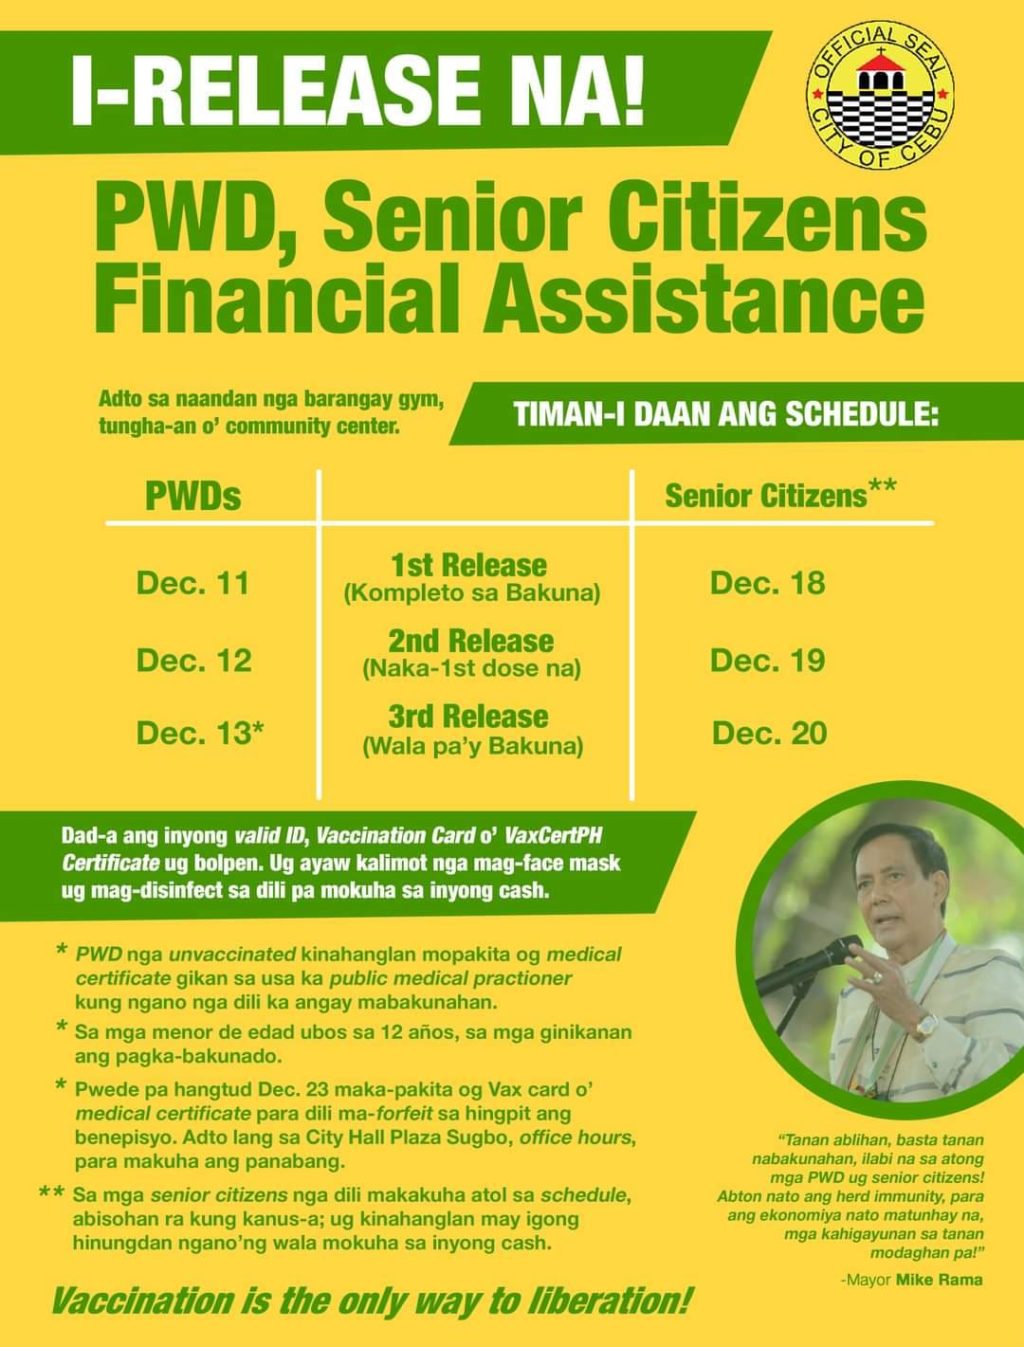 PWDS AND SENIOR CITIZENS SCHEDULE OF FINANCIAL AID DISTRIBUTION